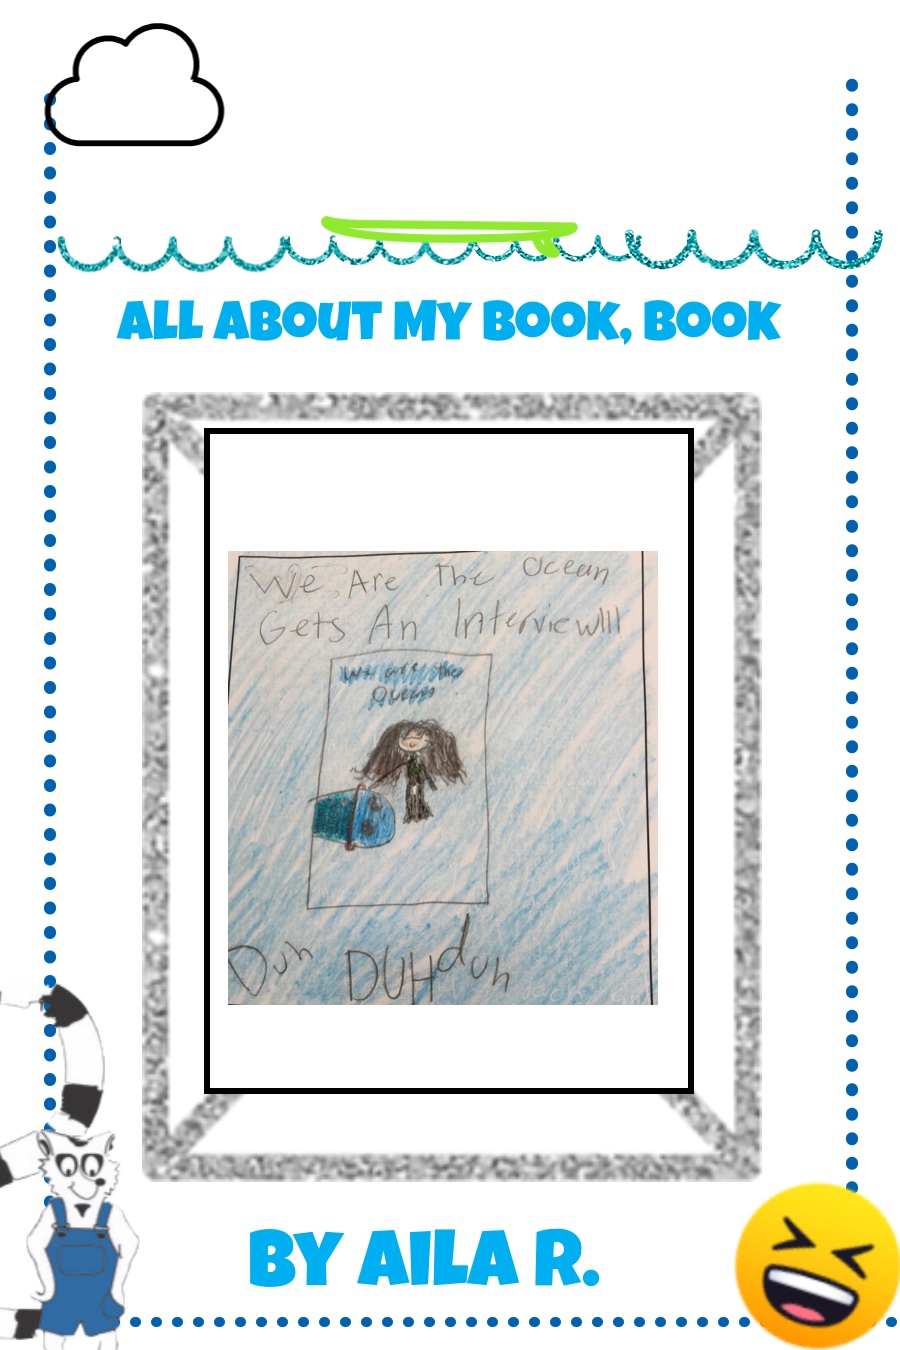 All About My Book by Aila R